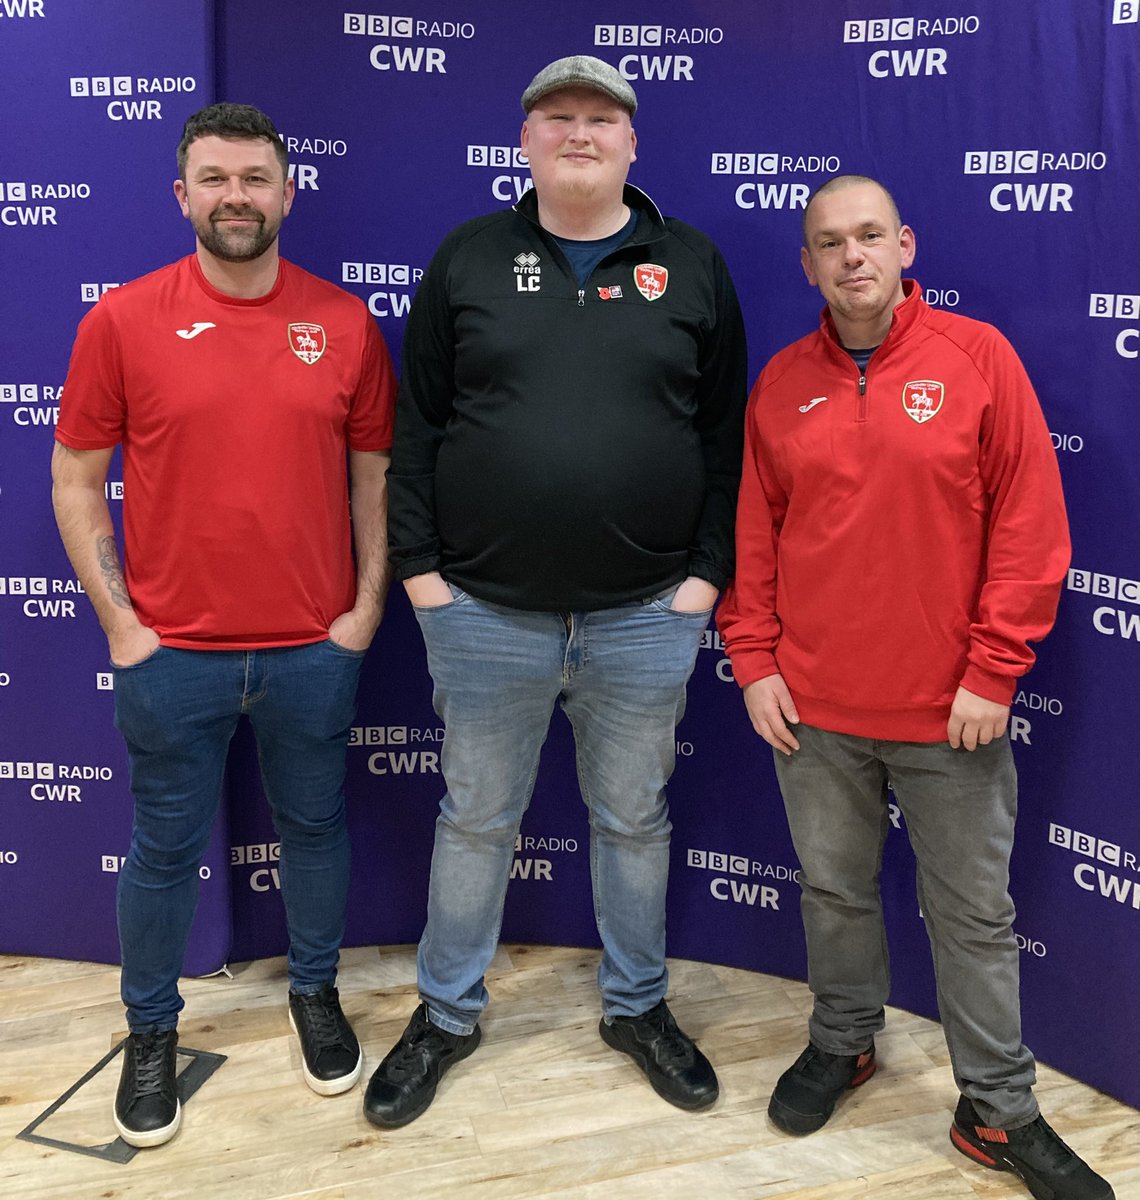 A big thank you to BBC CWR for having us in the studio this evening. We’ll share a link to the interview when the show is uploaded to BBC Sounds. 

#CovAndProud🔴🟢